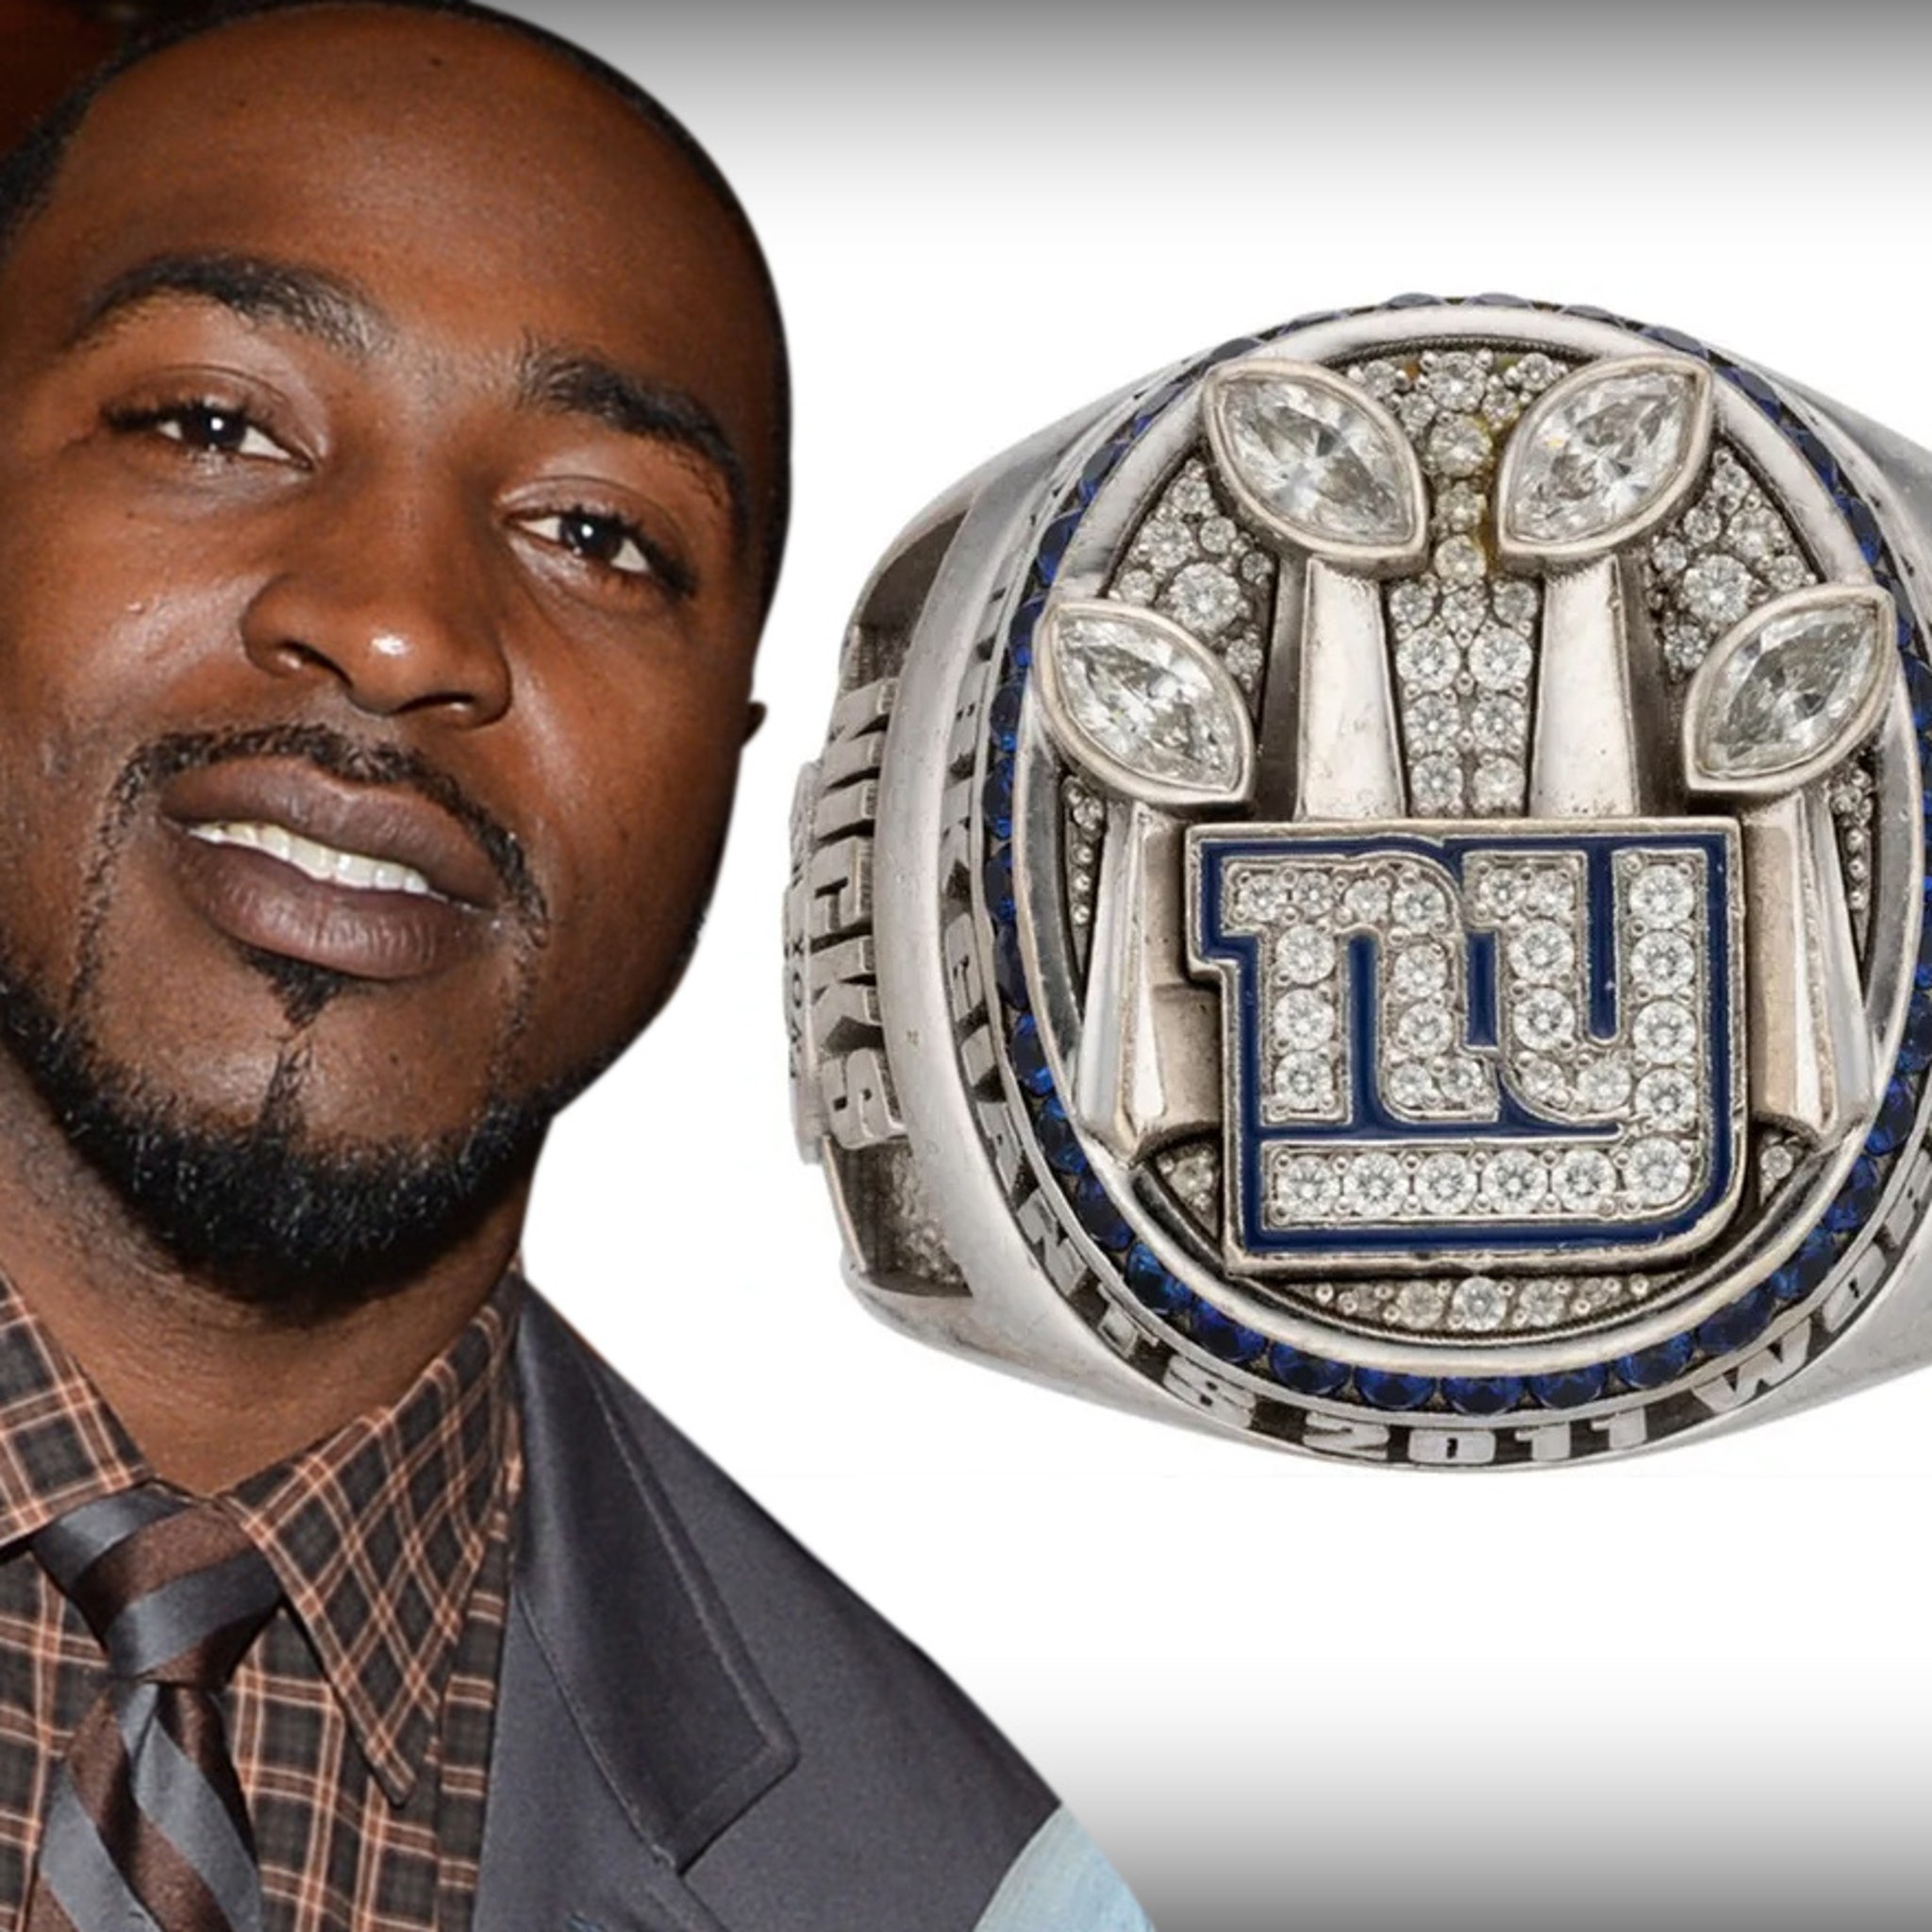 buy a real super bowl ring